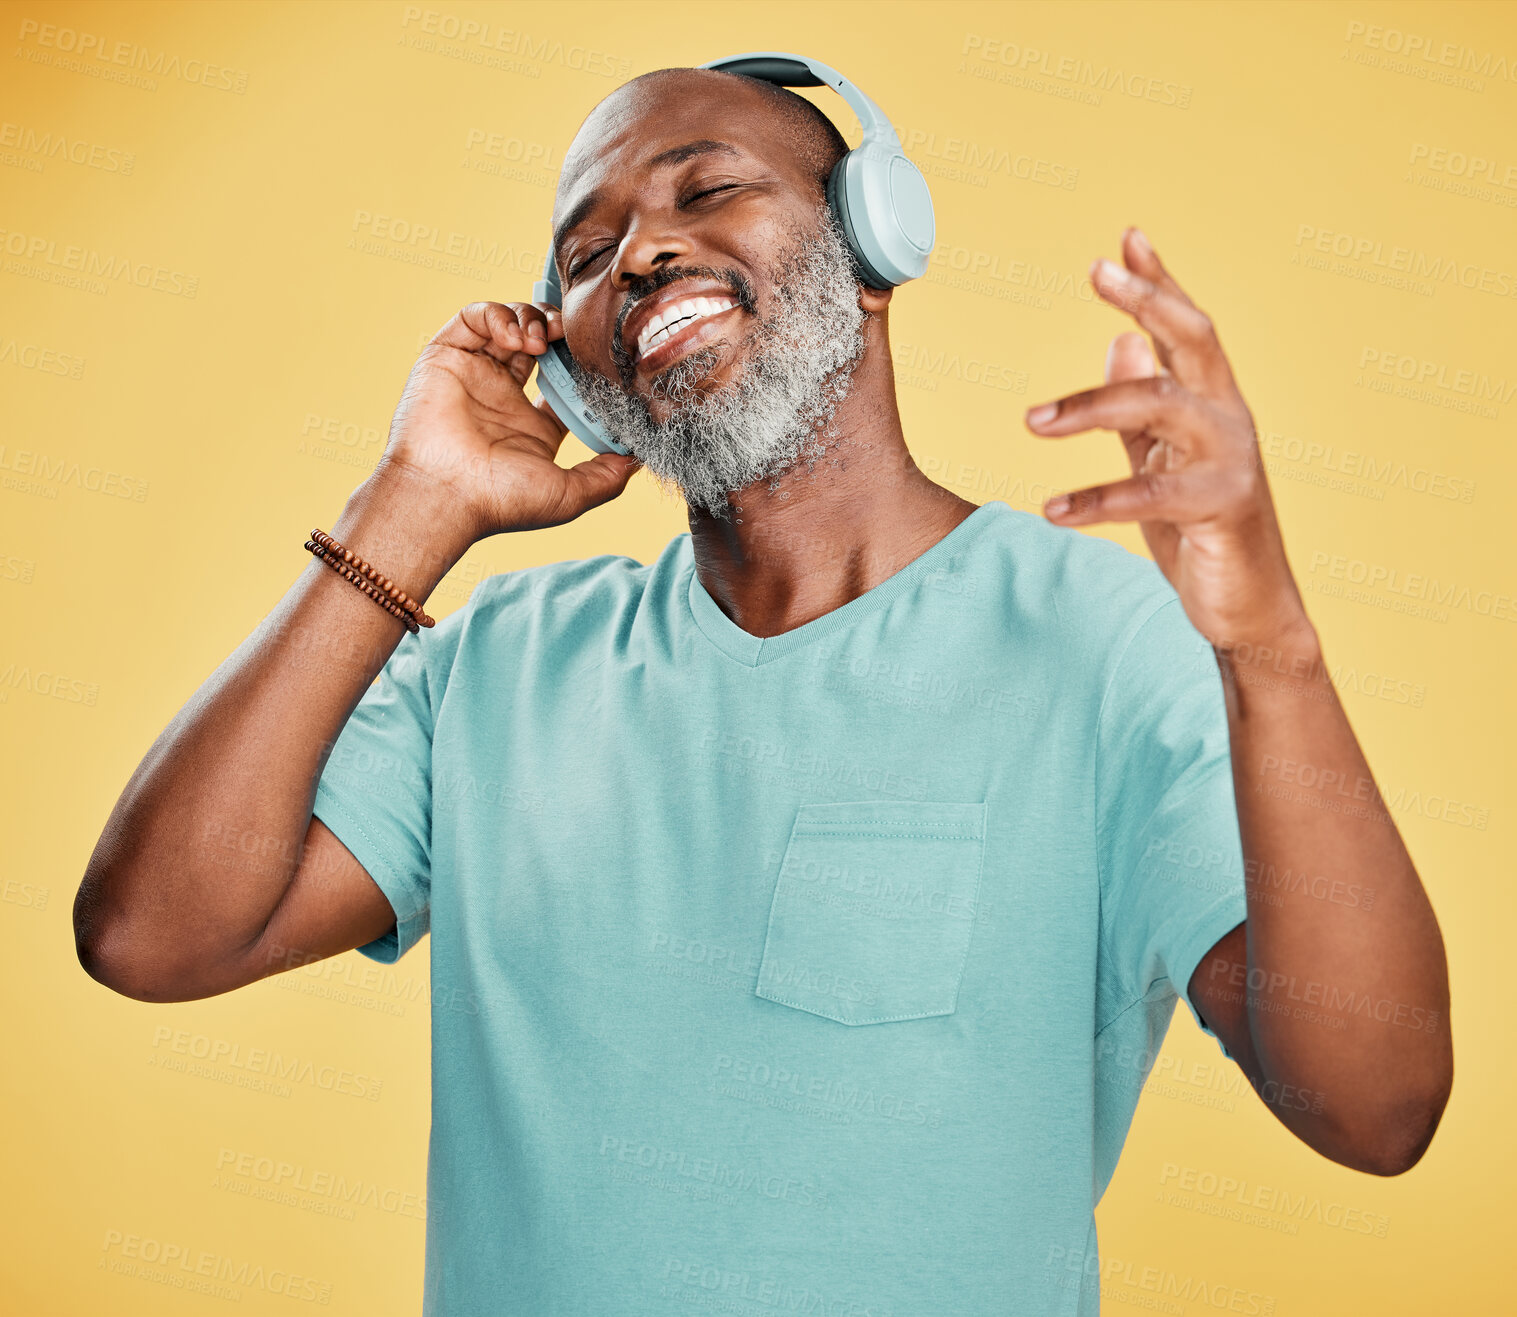 Buy stock photo One happy mature African American man wearing headphones and listening to music while dancing against a yellow background in the studio. Smiling black man feeling free while expressing through dance